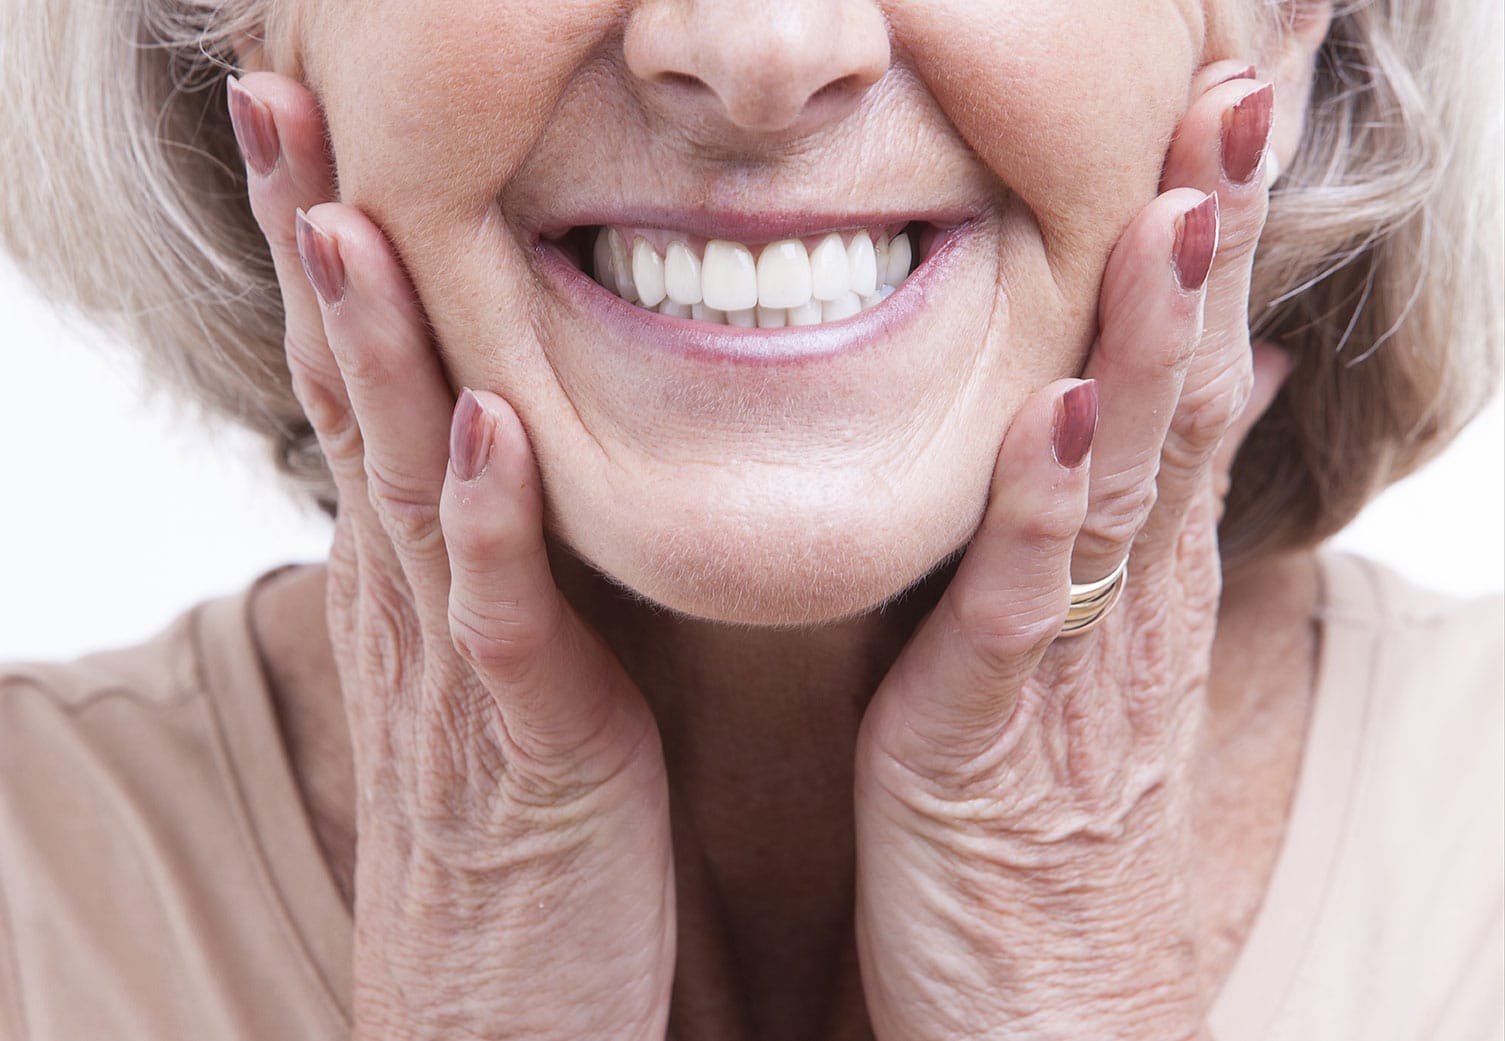 An older woman smiles, showing off her healthy and white teeth.